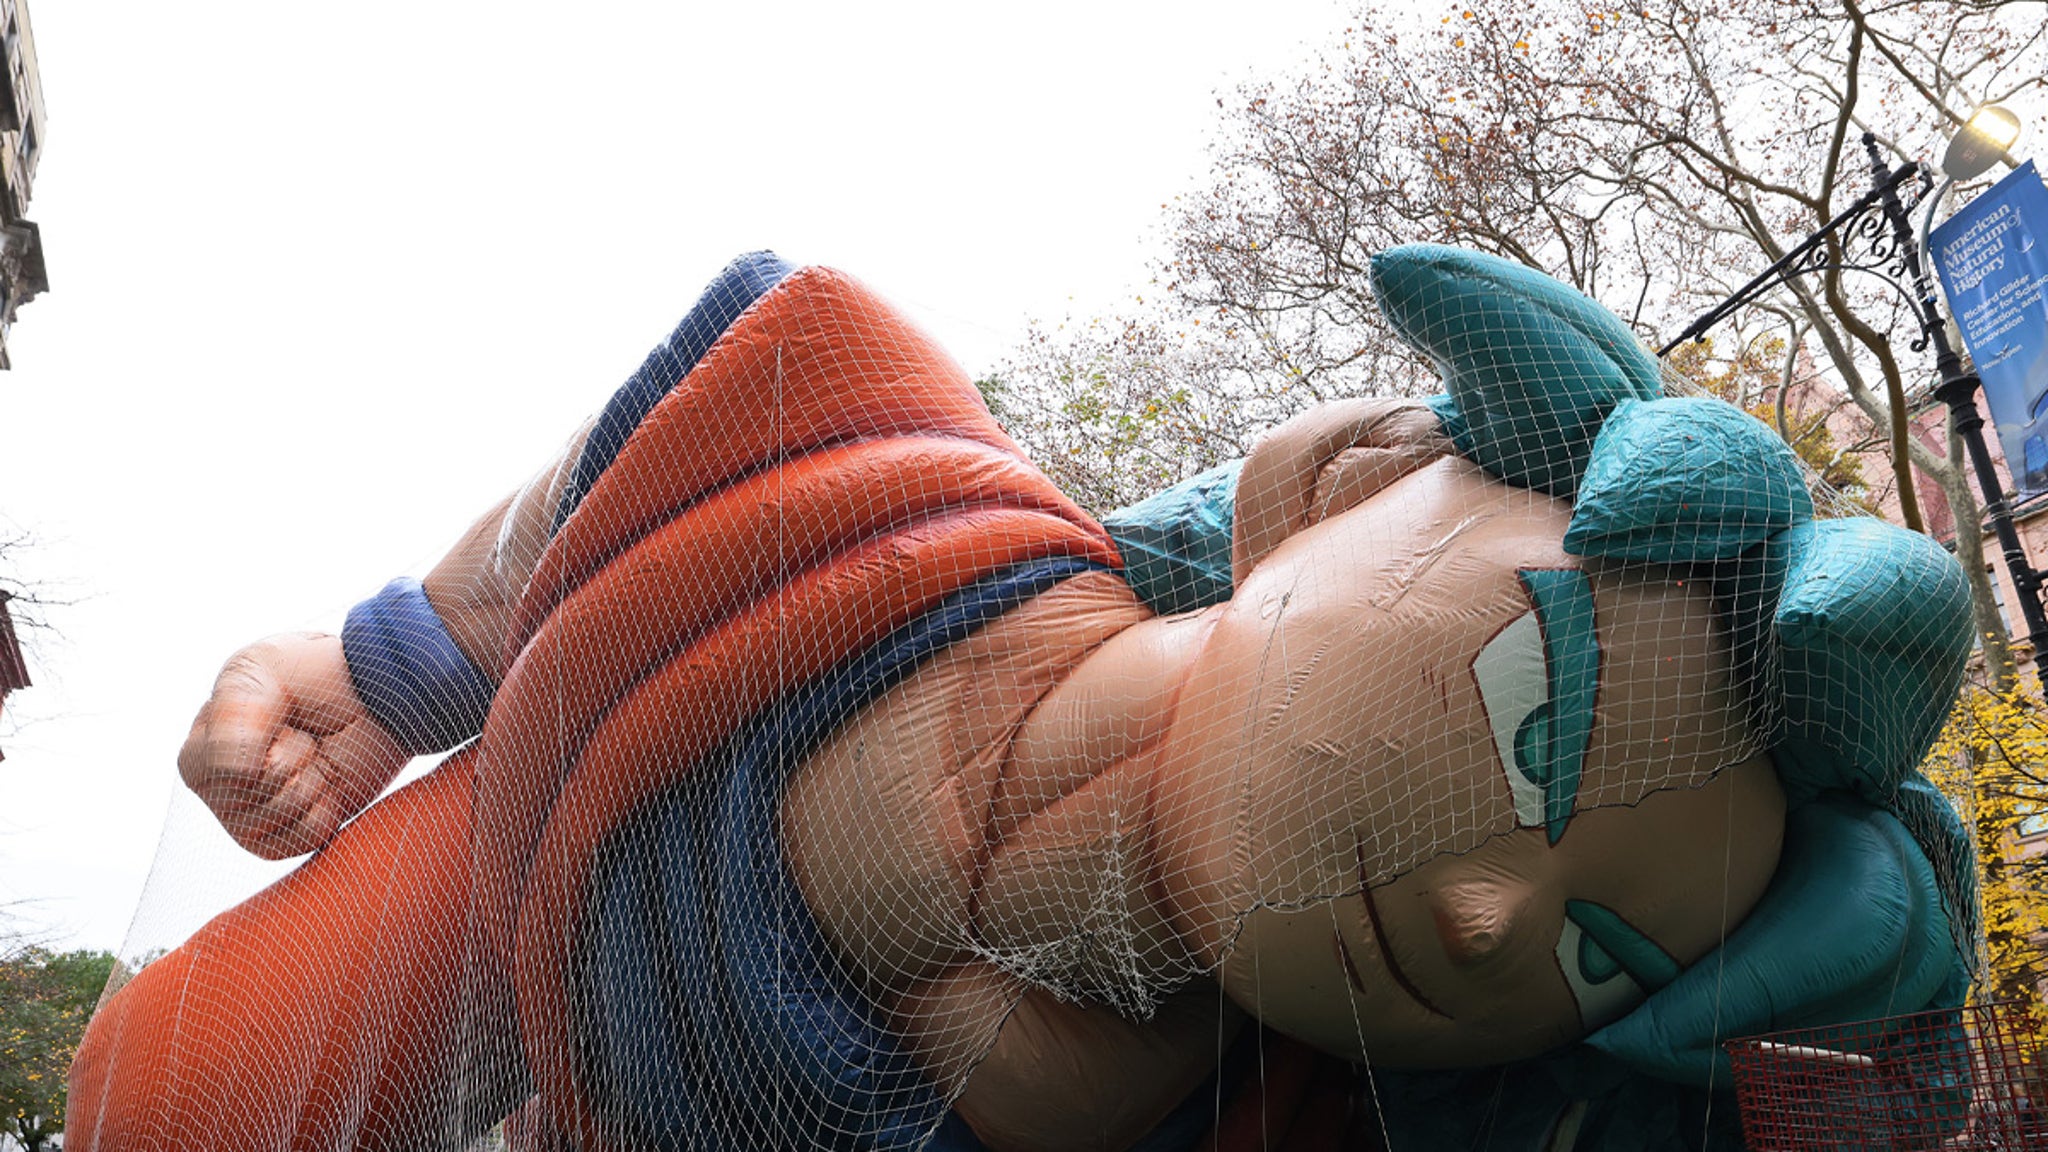 Macy’s Thanksgiving Day Parade Floats And Balloons…